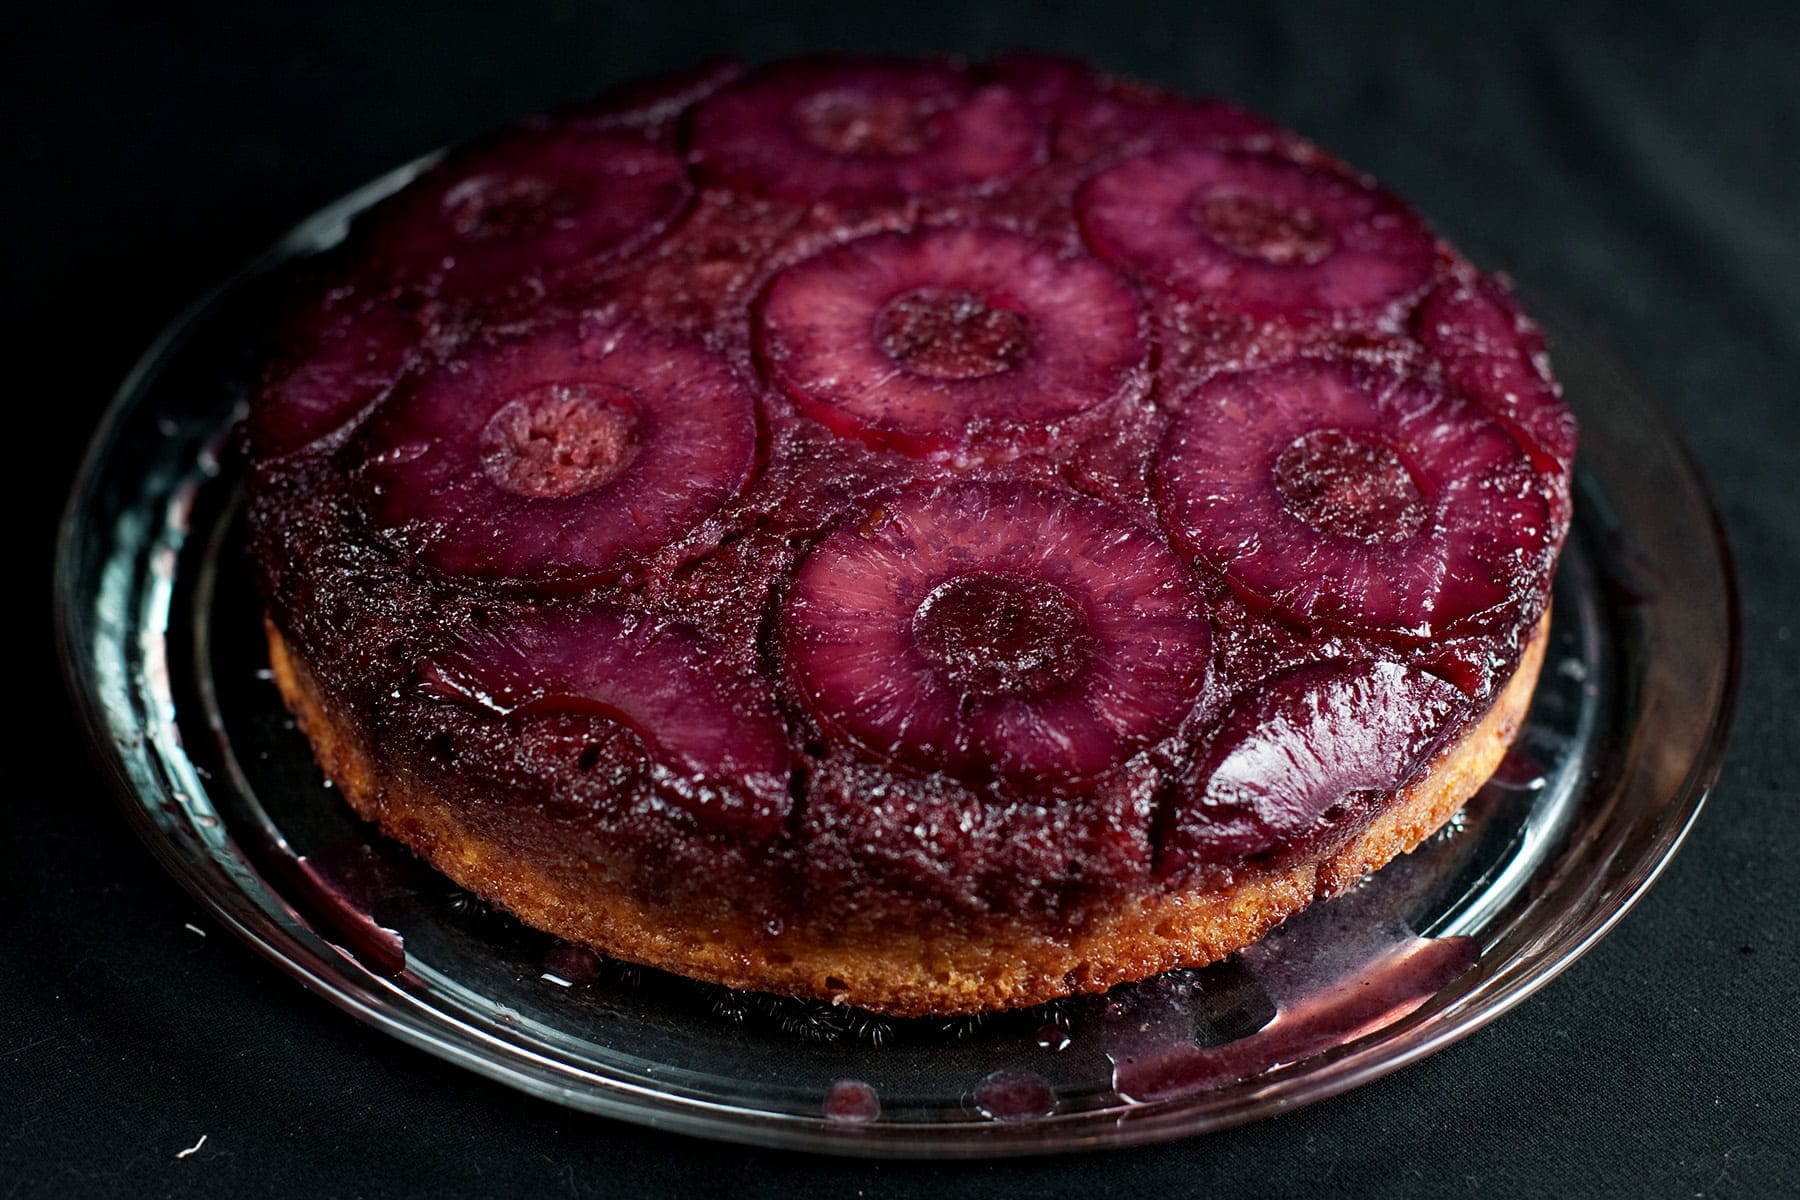 French Martini Upside Down Cake - A round pineapple upside down cake, with a VERY purple top.